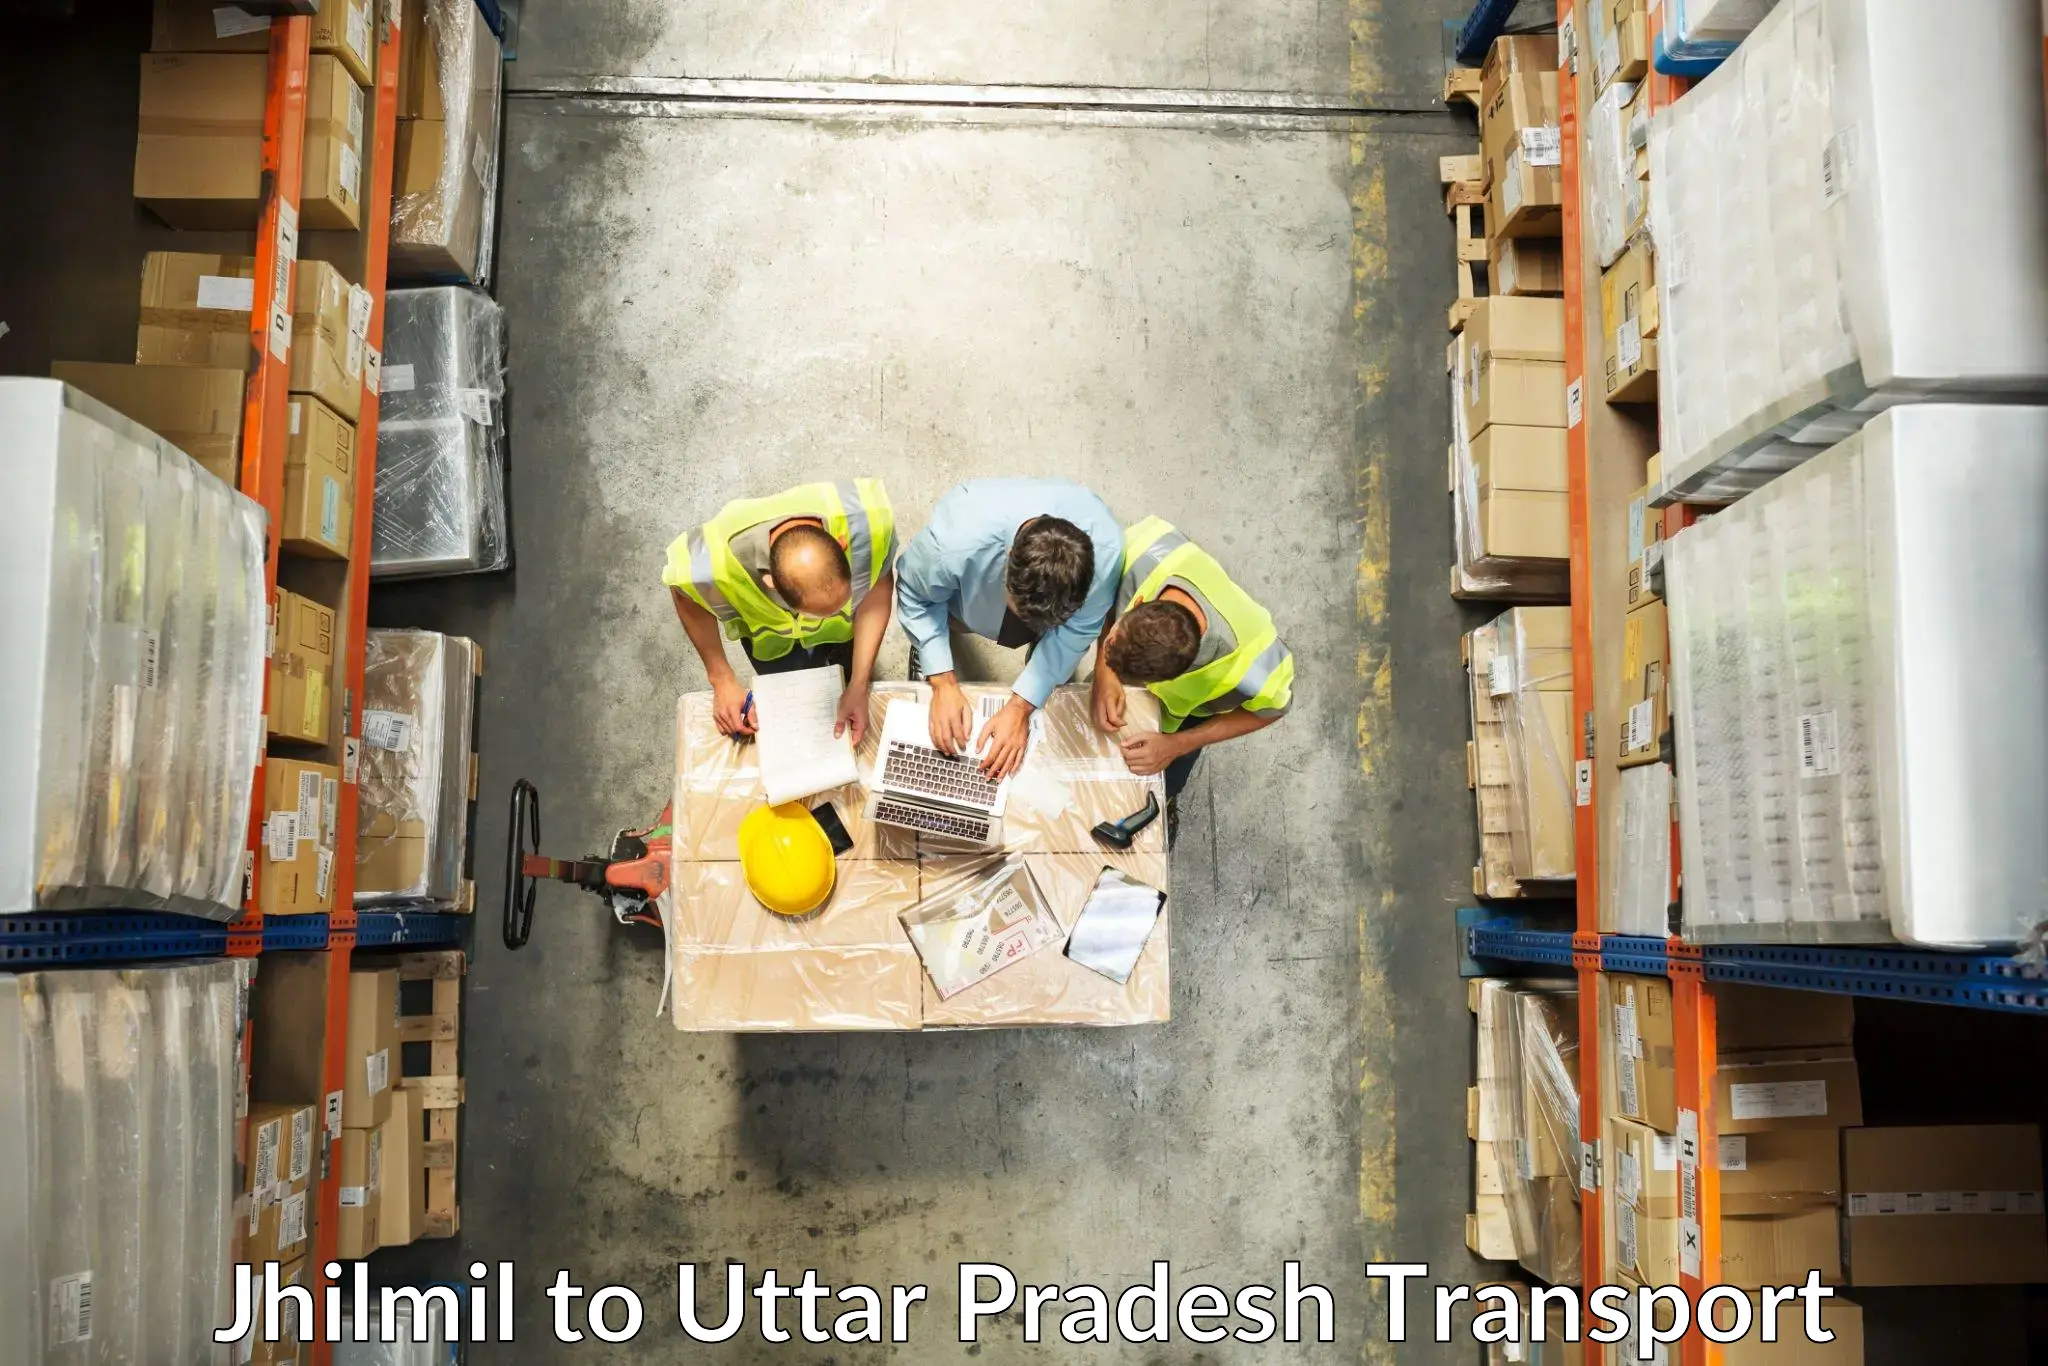 Part load transport service in India Jhilmil to Kulpahar